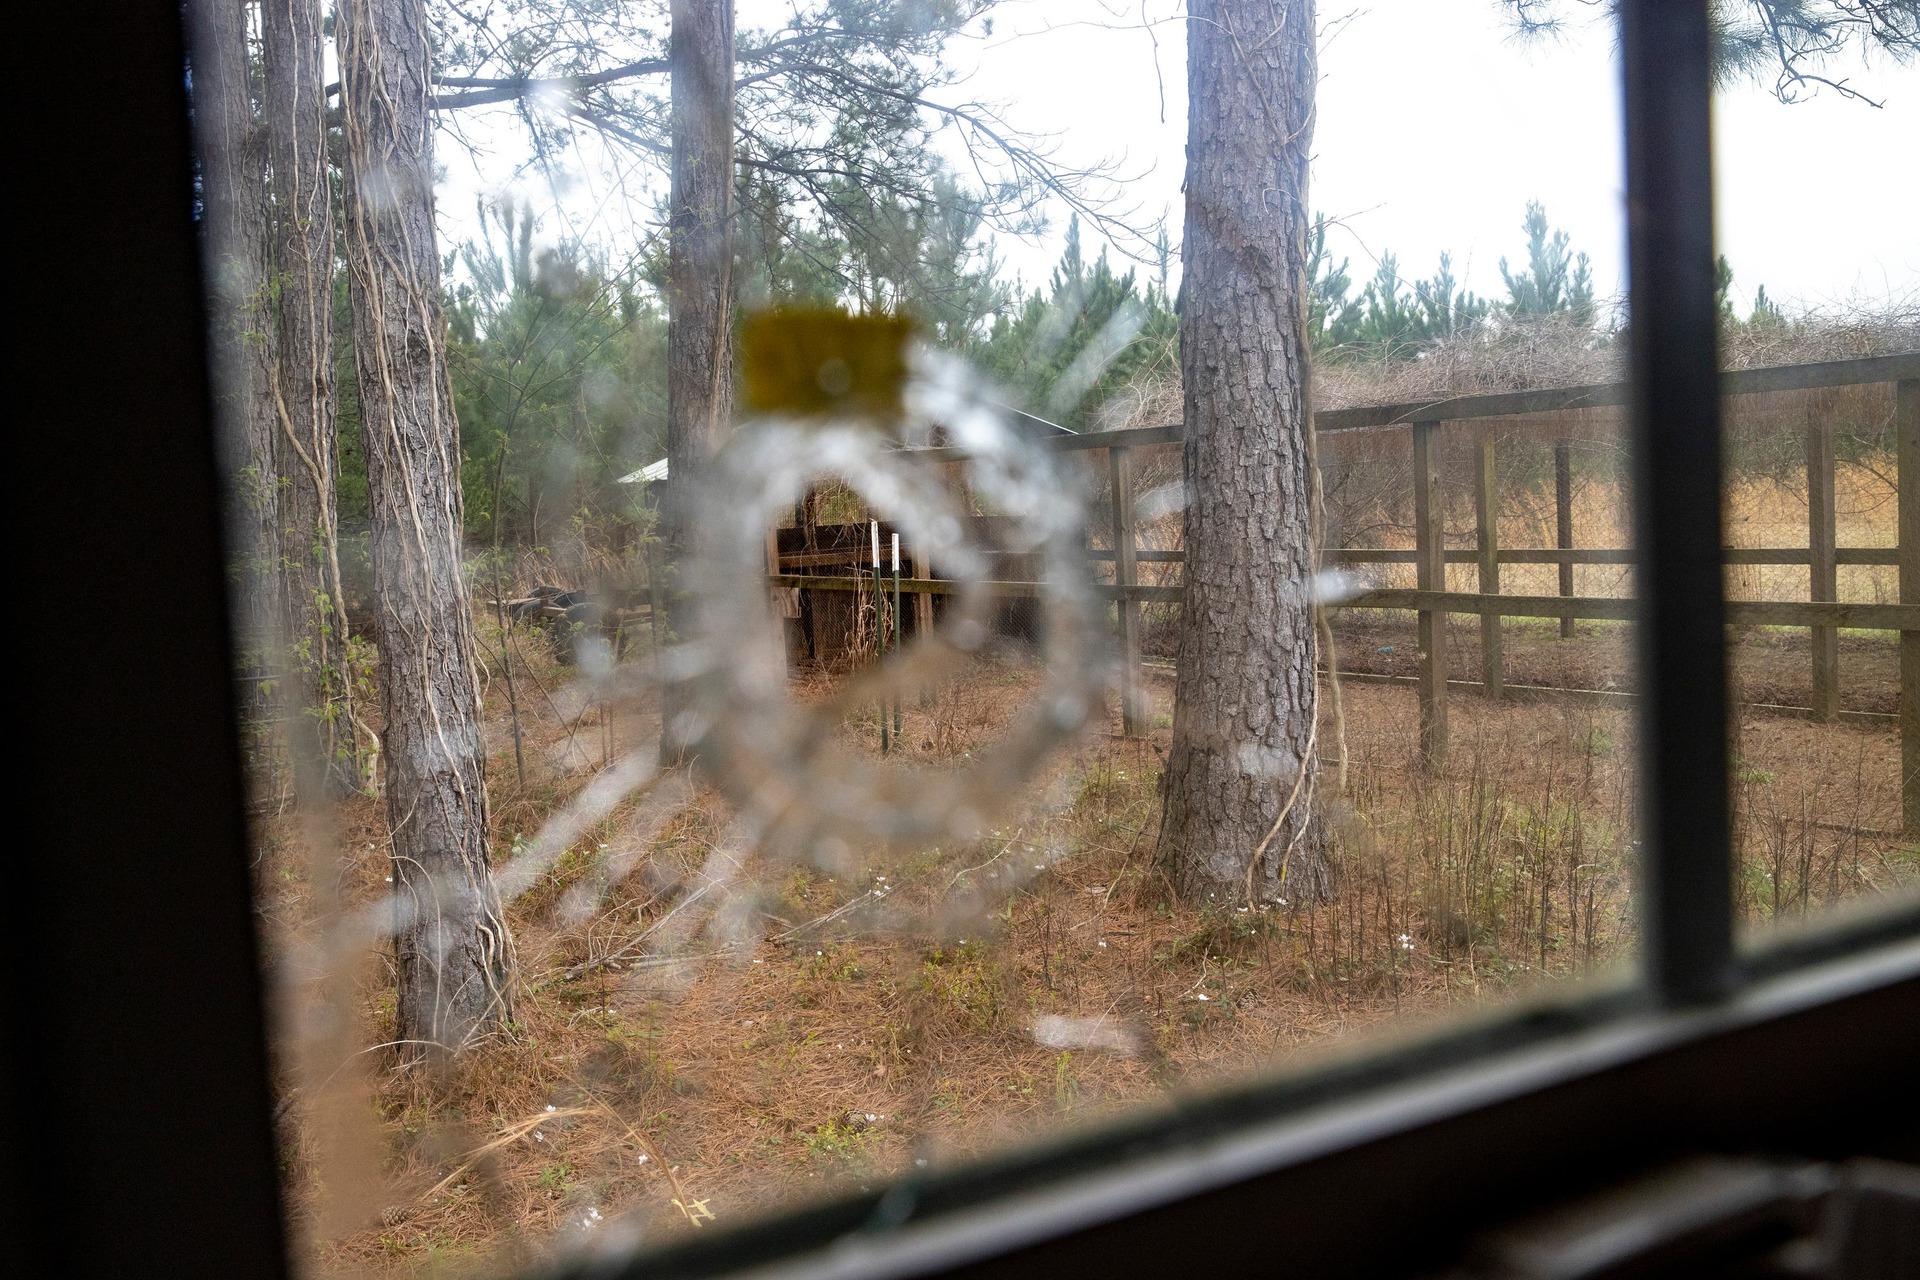 A bullet hole is seen from inside of the feed room at the Murdaugh Moselle property.